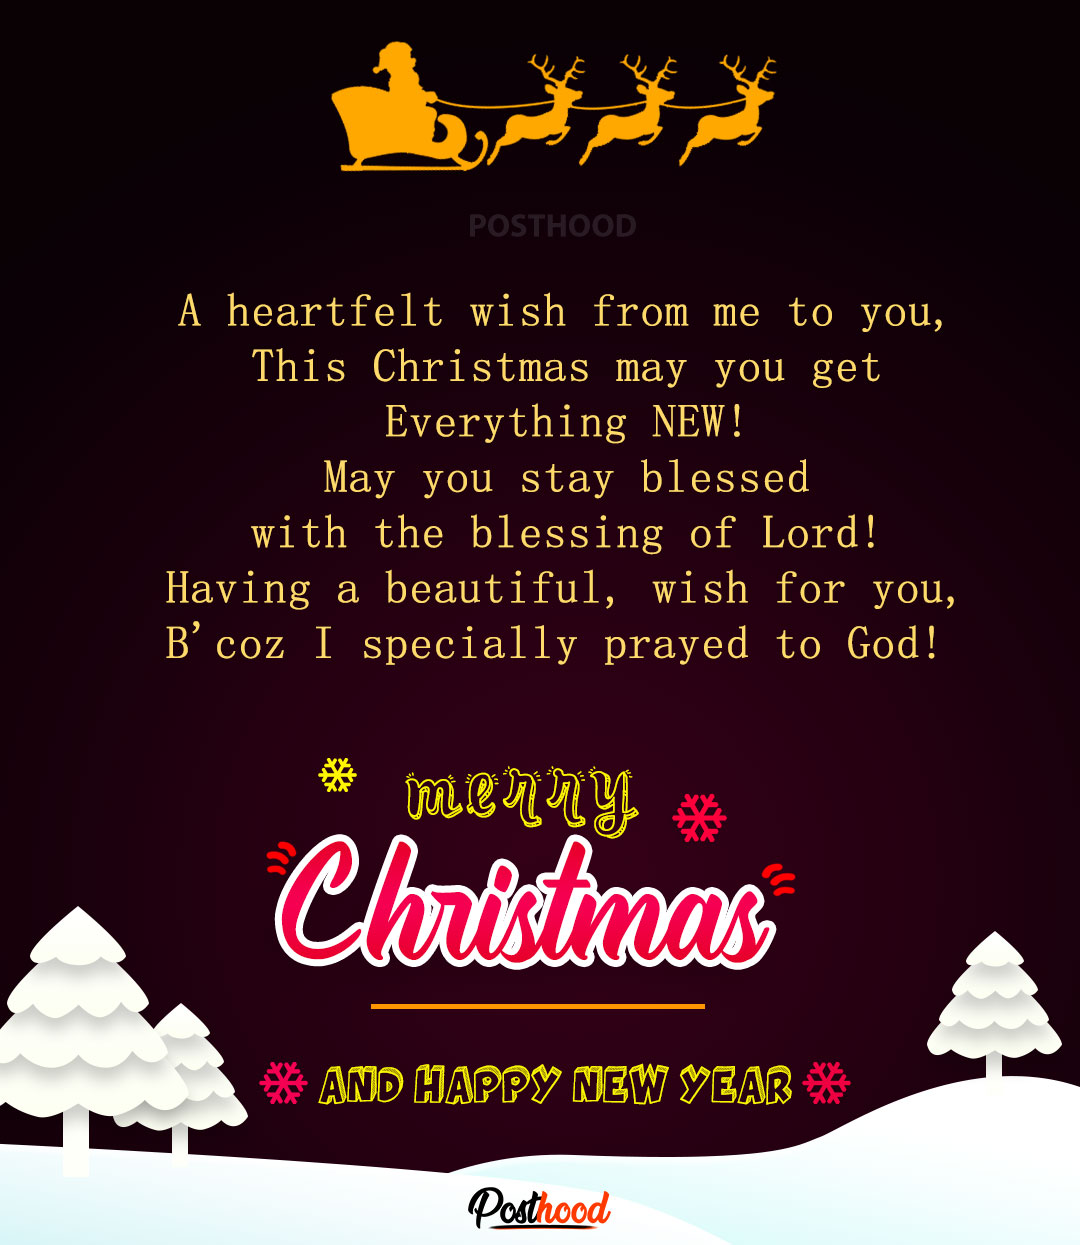 A heartwarming Christmas wishes for your friends and family. Send them blessings and love for Christmas and New Year.